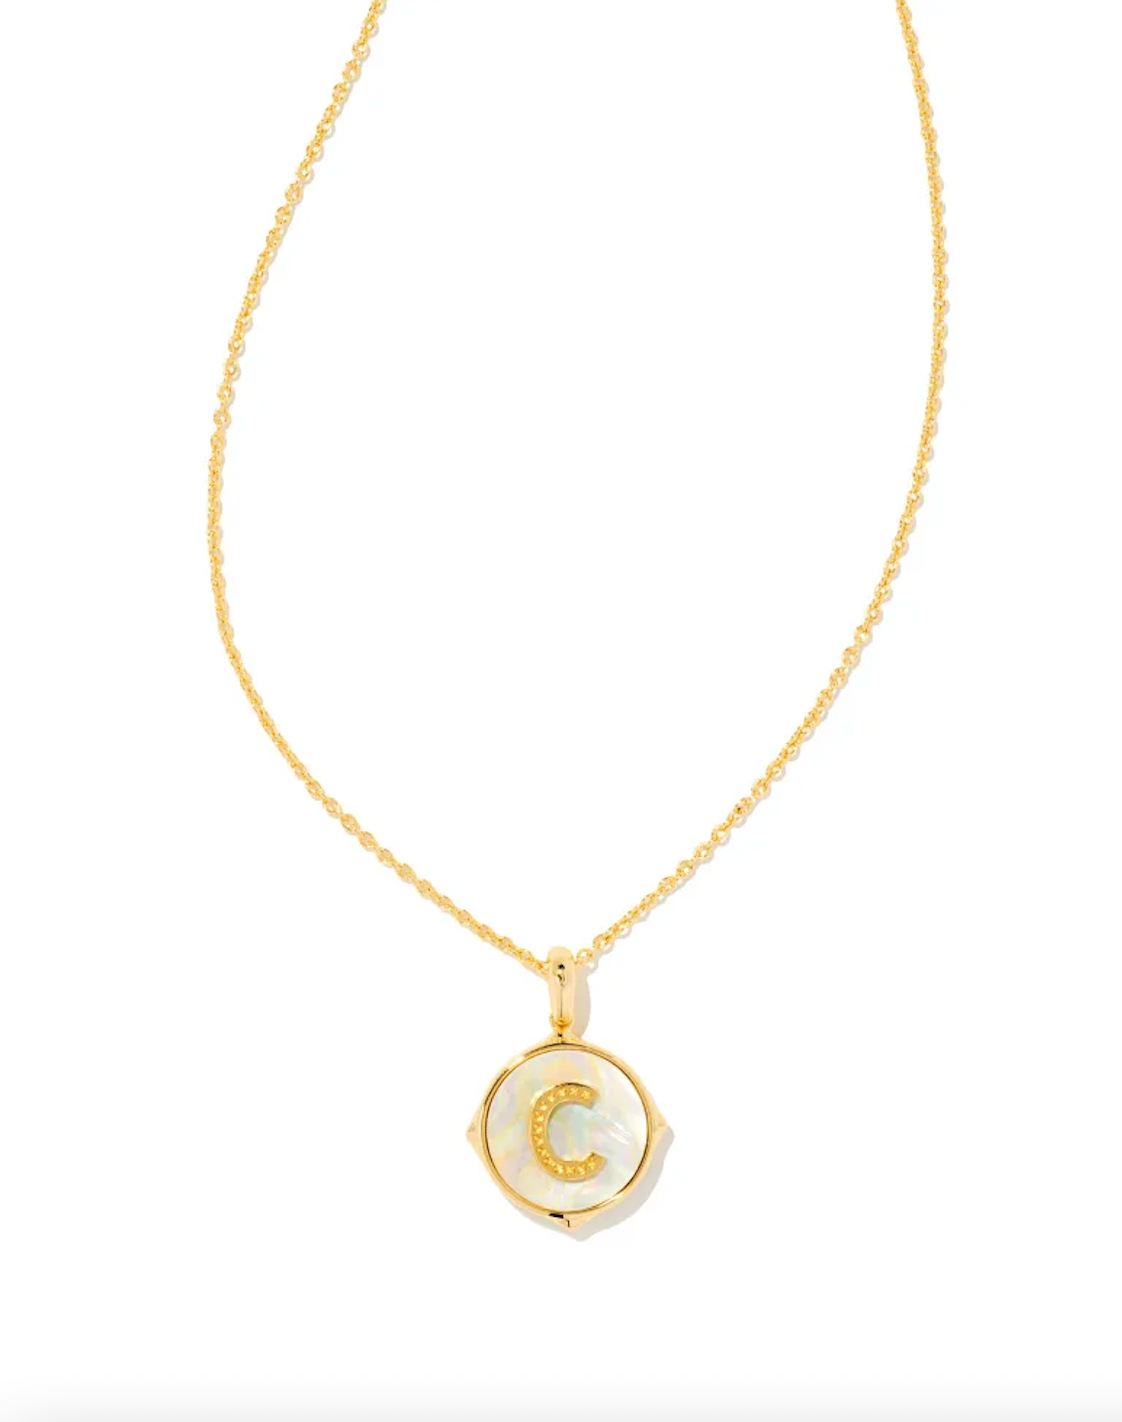 KENDRA SCOTT LETTER C DISC PENDENT NECKLACE GOLD IRIDESCENT ABALONE